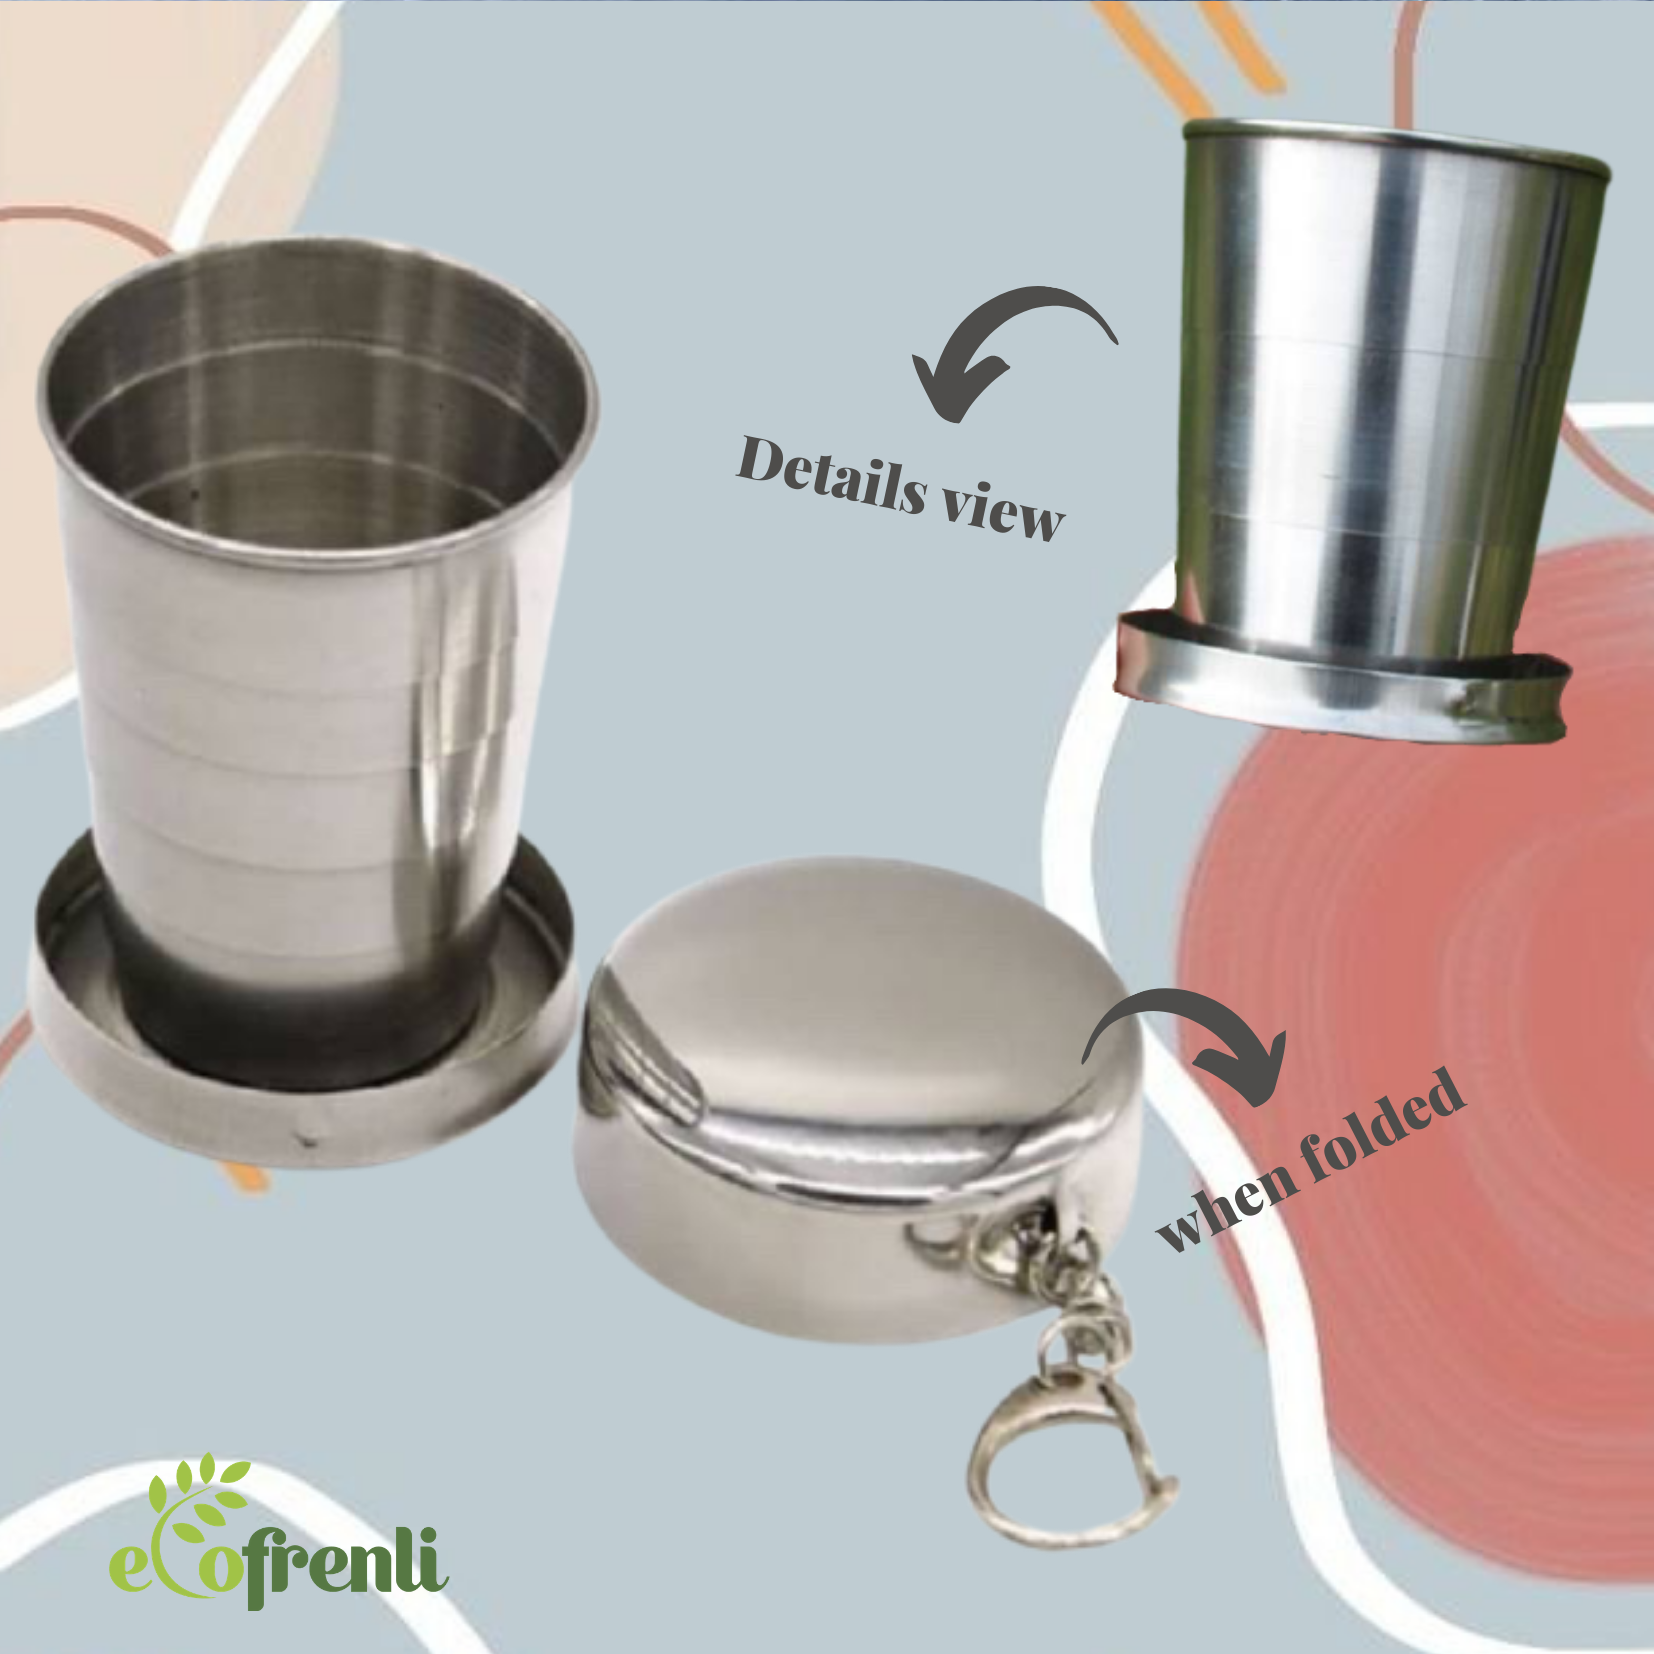 Outdoor Foldable Stainless Cup {3 pcs) - Ecofrenli.com